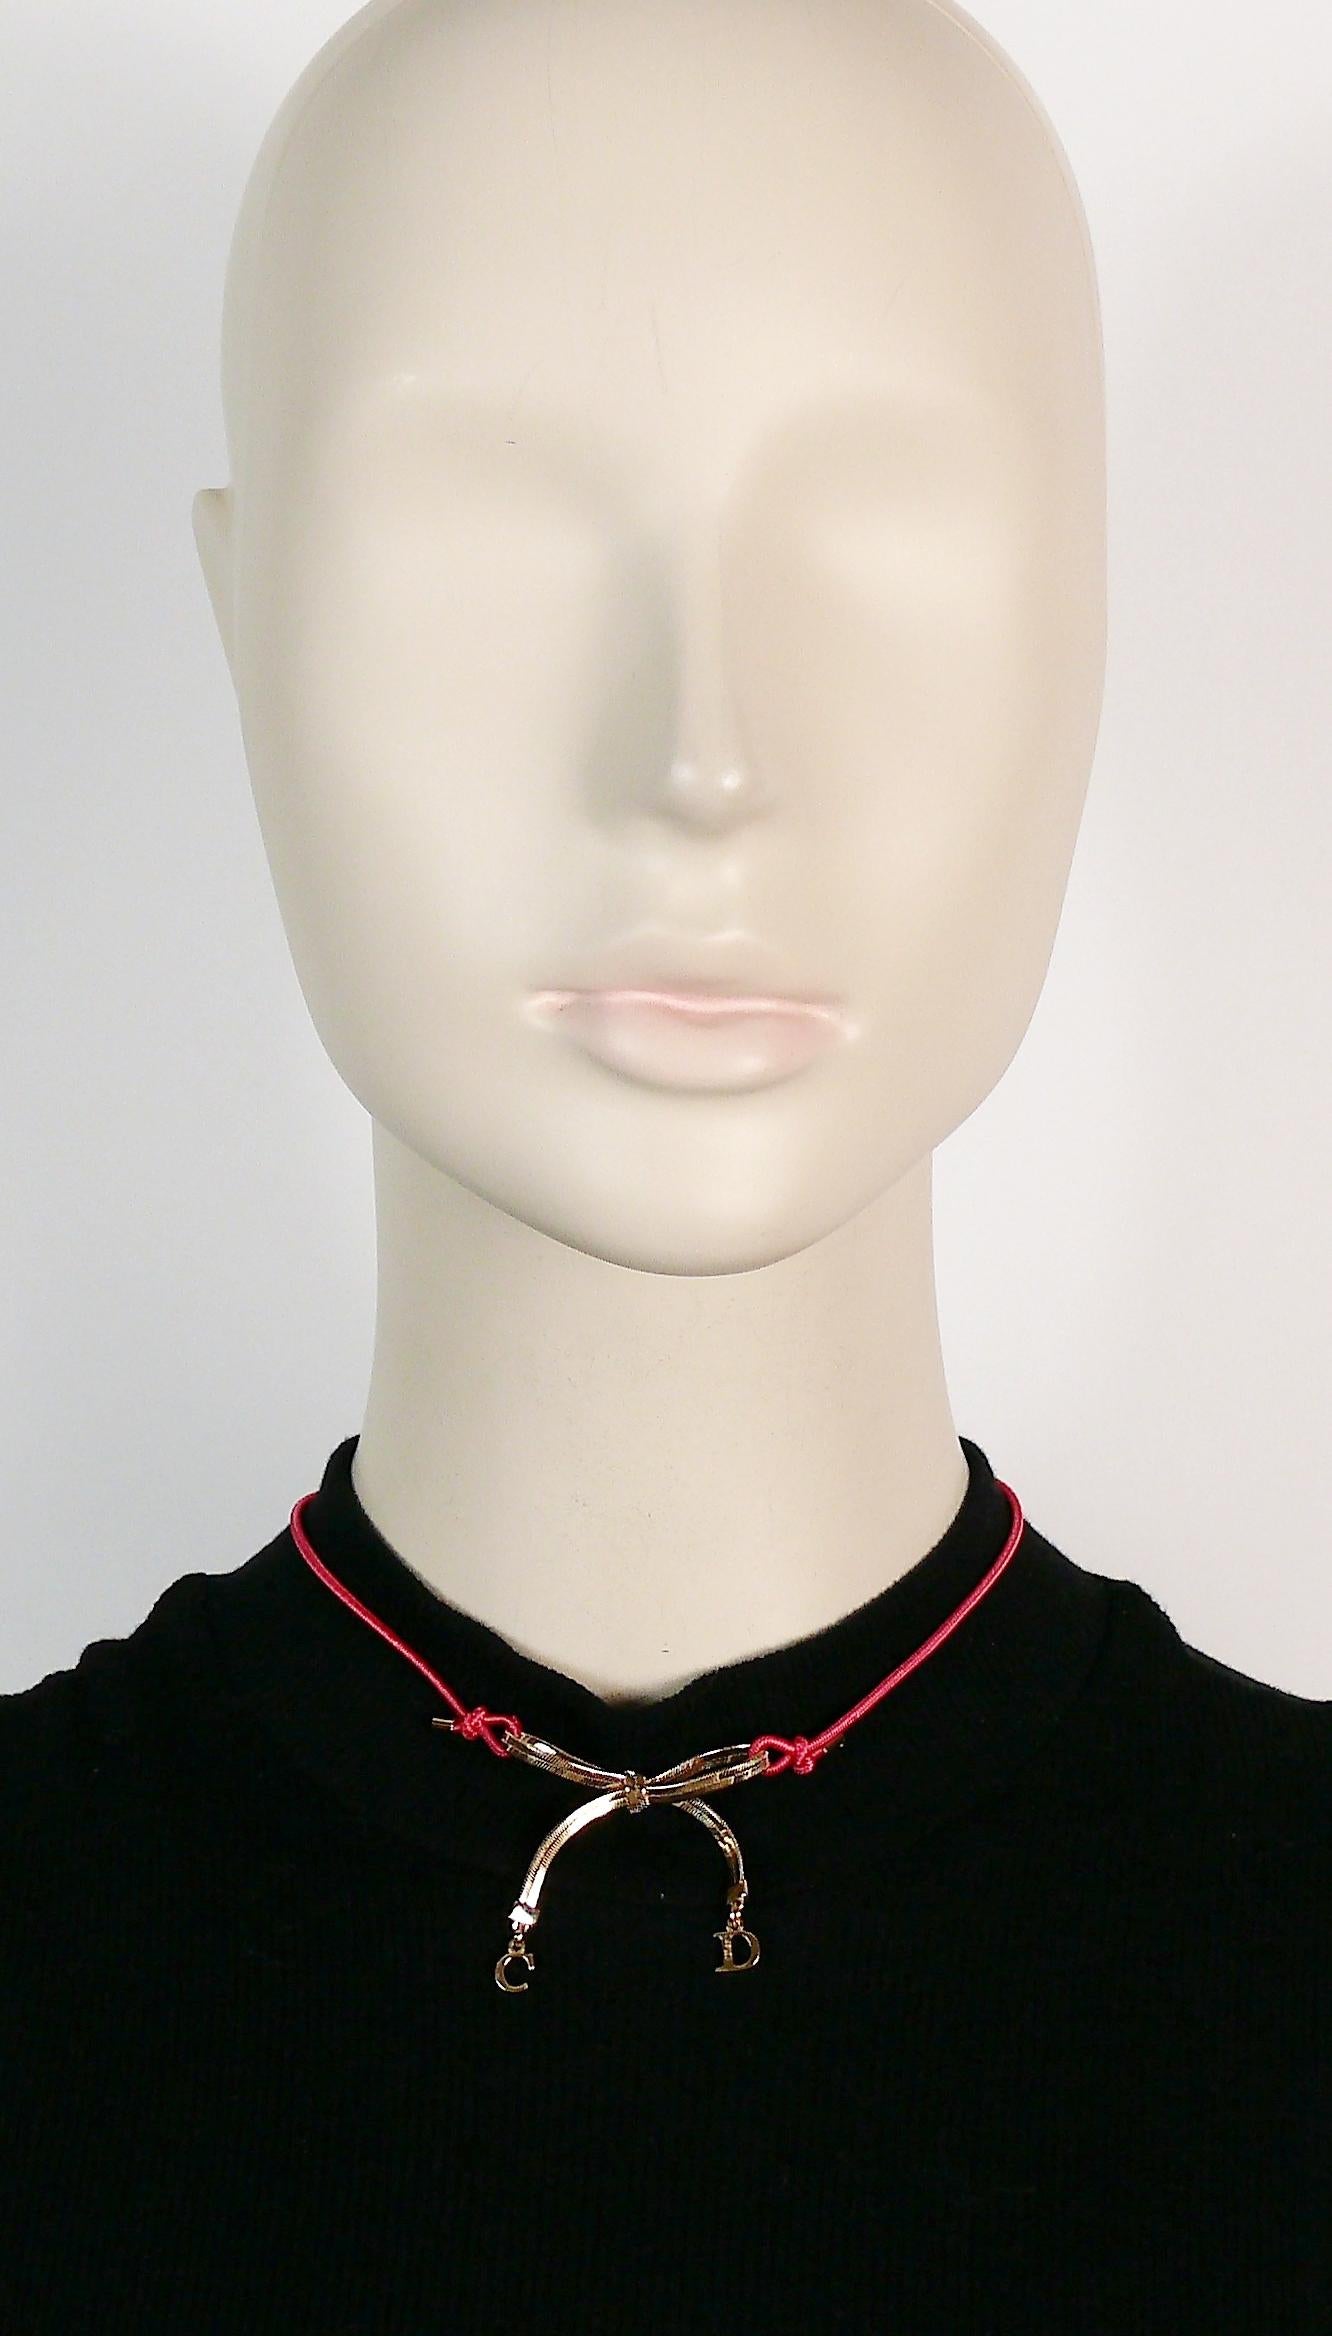 CHRISTIAN DIOR choker necklace featuring gold toned bow and CD charms, red elasticated strap.

Lobster clasp closure.
Adjustable length.

Embossed DIOR.

NOTES
- This is a preloved vintage item, therefore it might have imperfections.
- Colors may